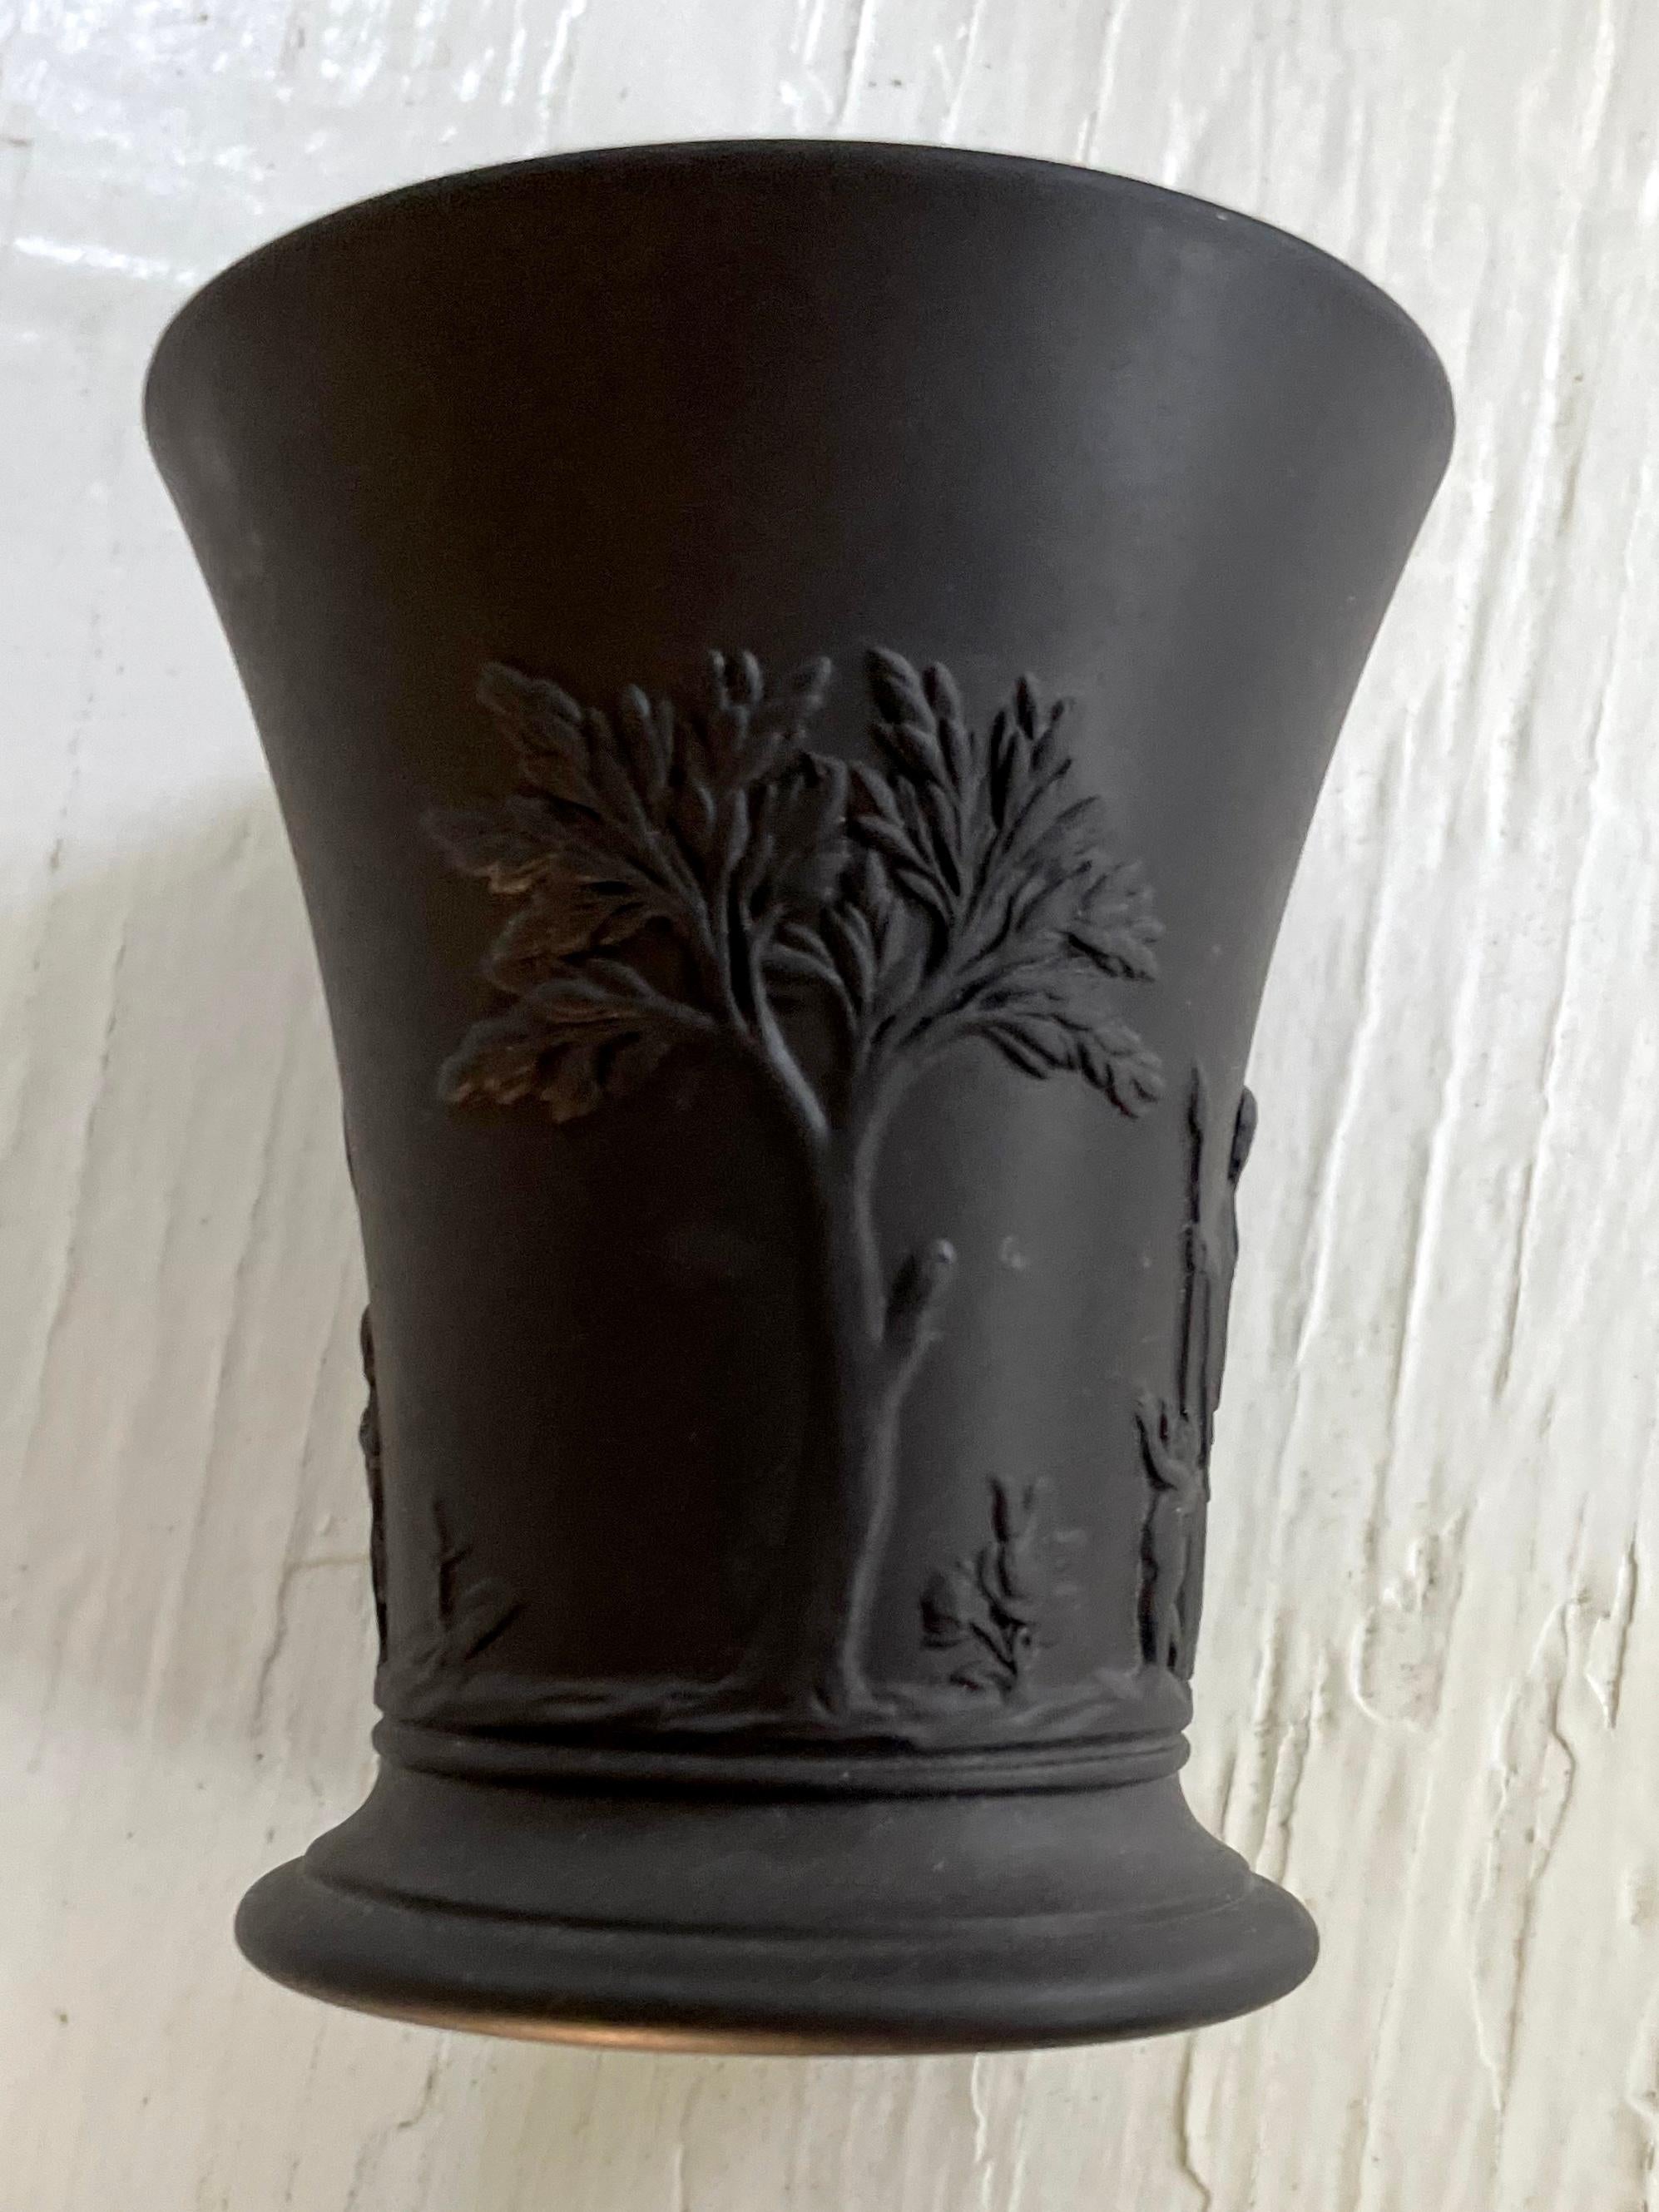 Basalt neoclassical shape budvase/beaker with figures and trees
Dimensions: 3.25